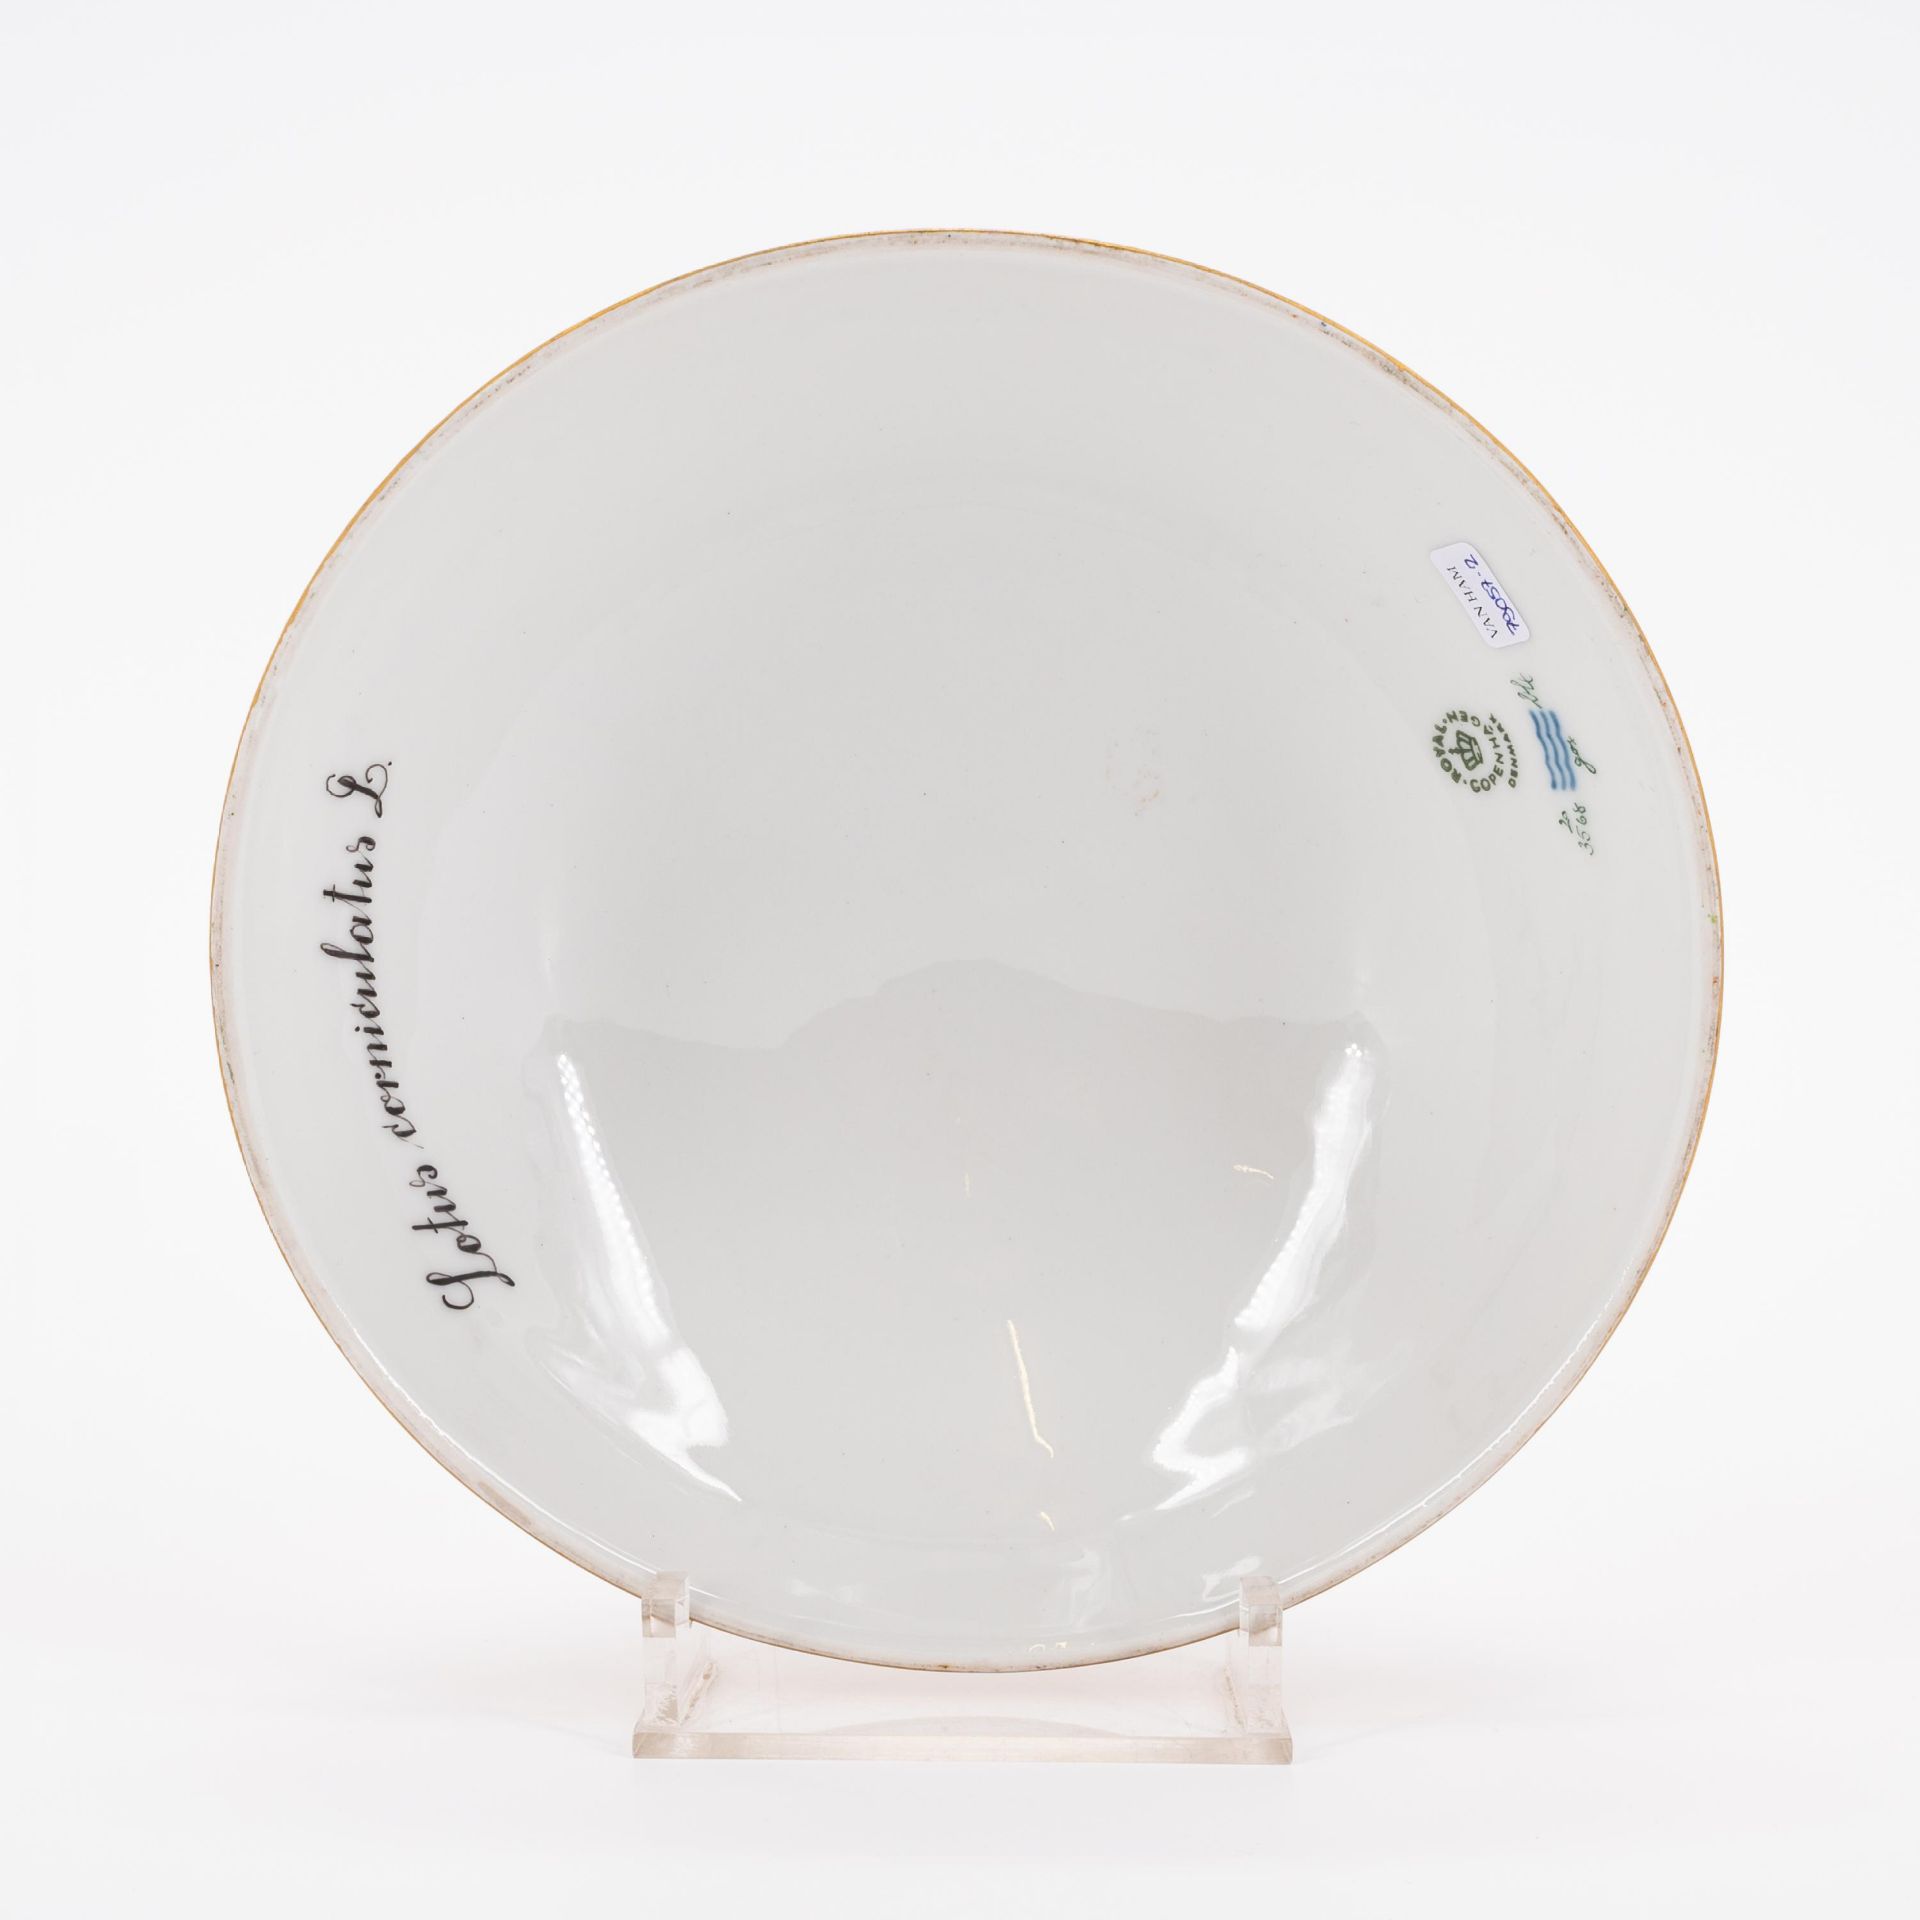 18 PIECES FROM A PORCELAIN DINNER SERVICE 'FLORA DANICA' - Image 21 of 26